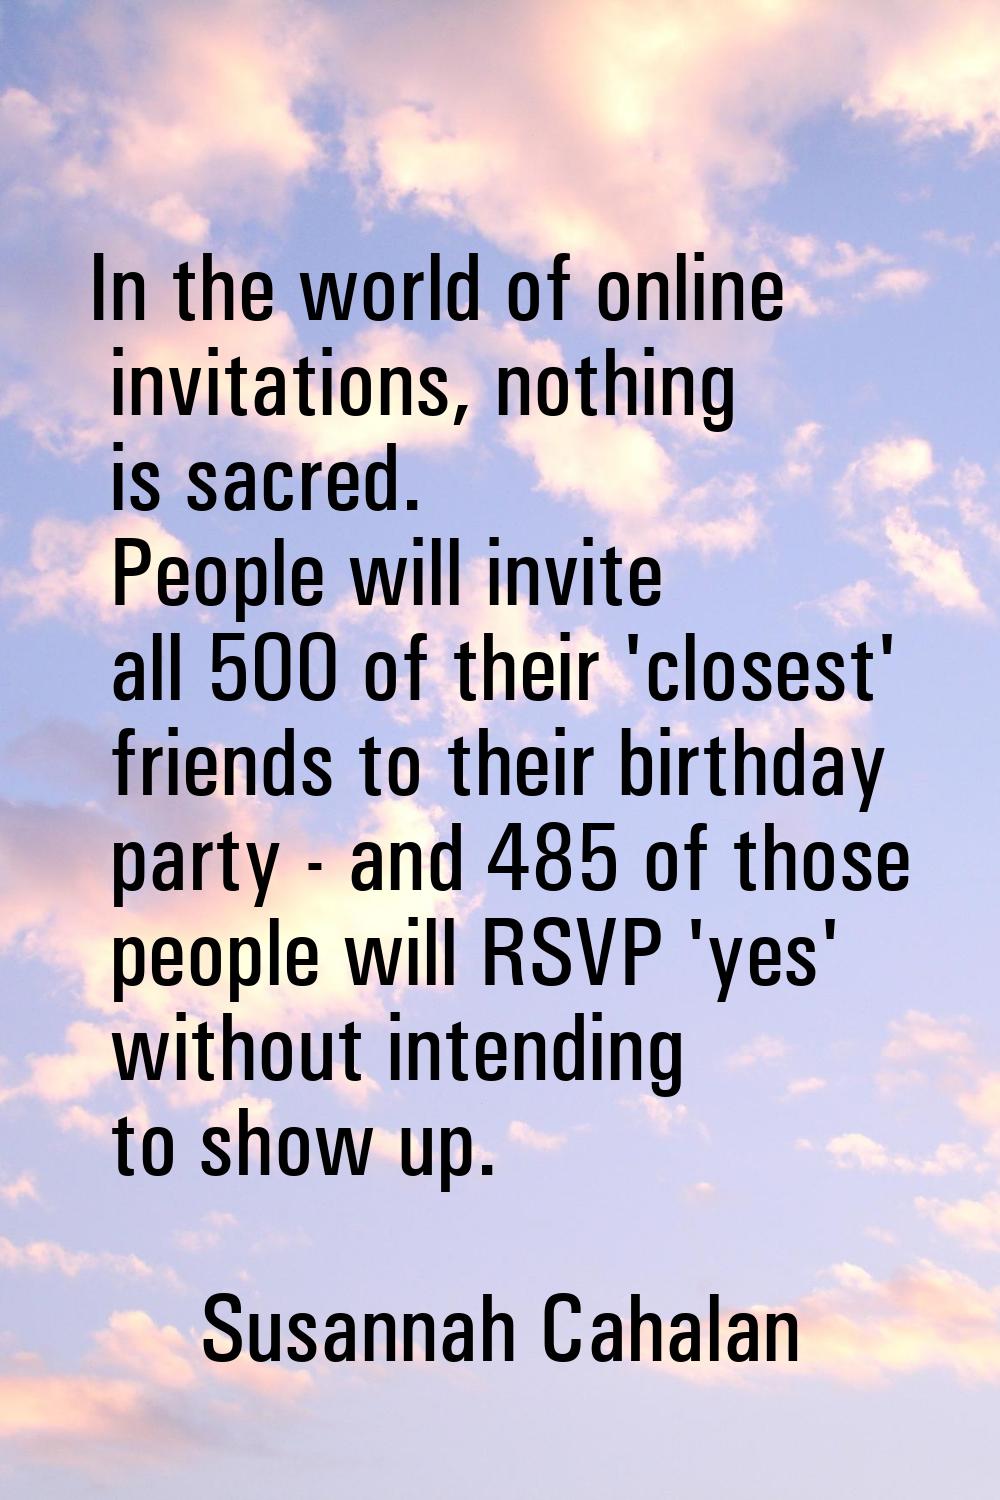 In the world of online invitations, nothing is sacred. People will invite all 500 of their 'closest